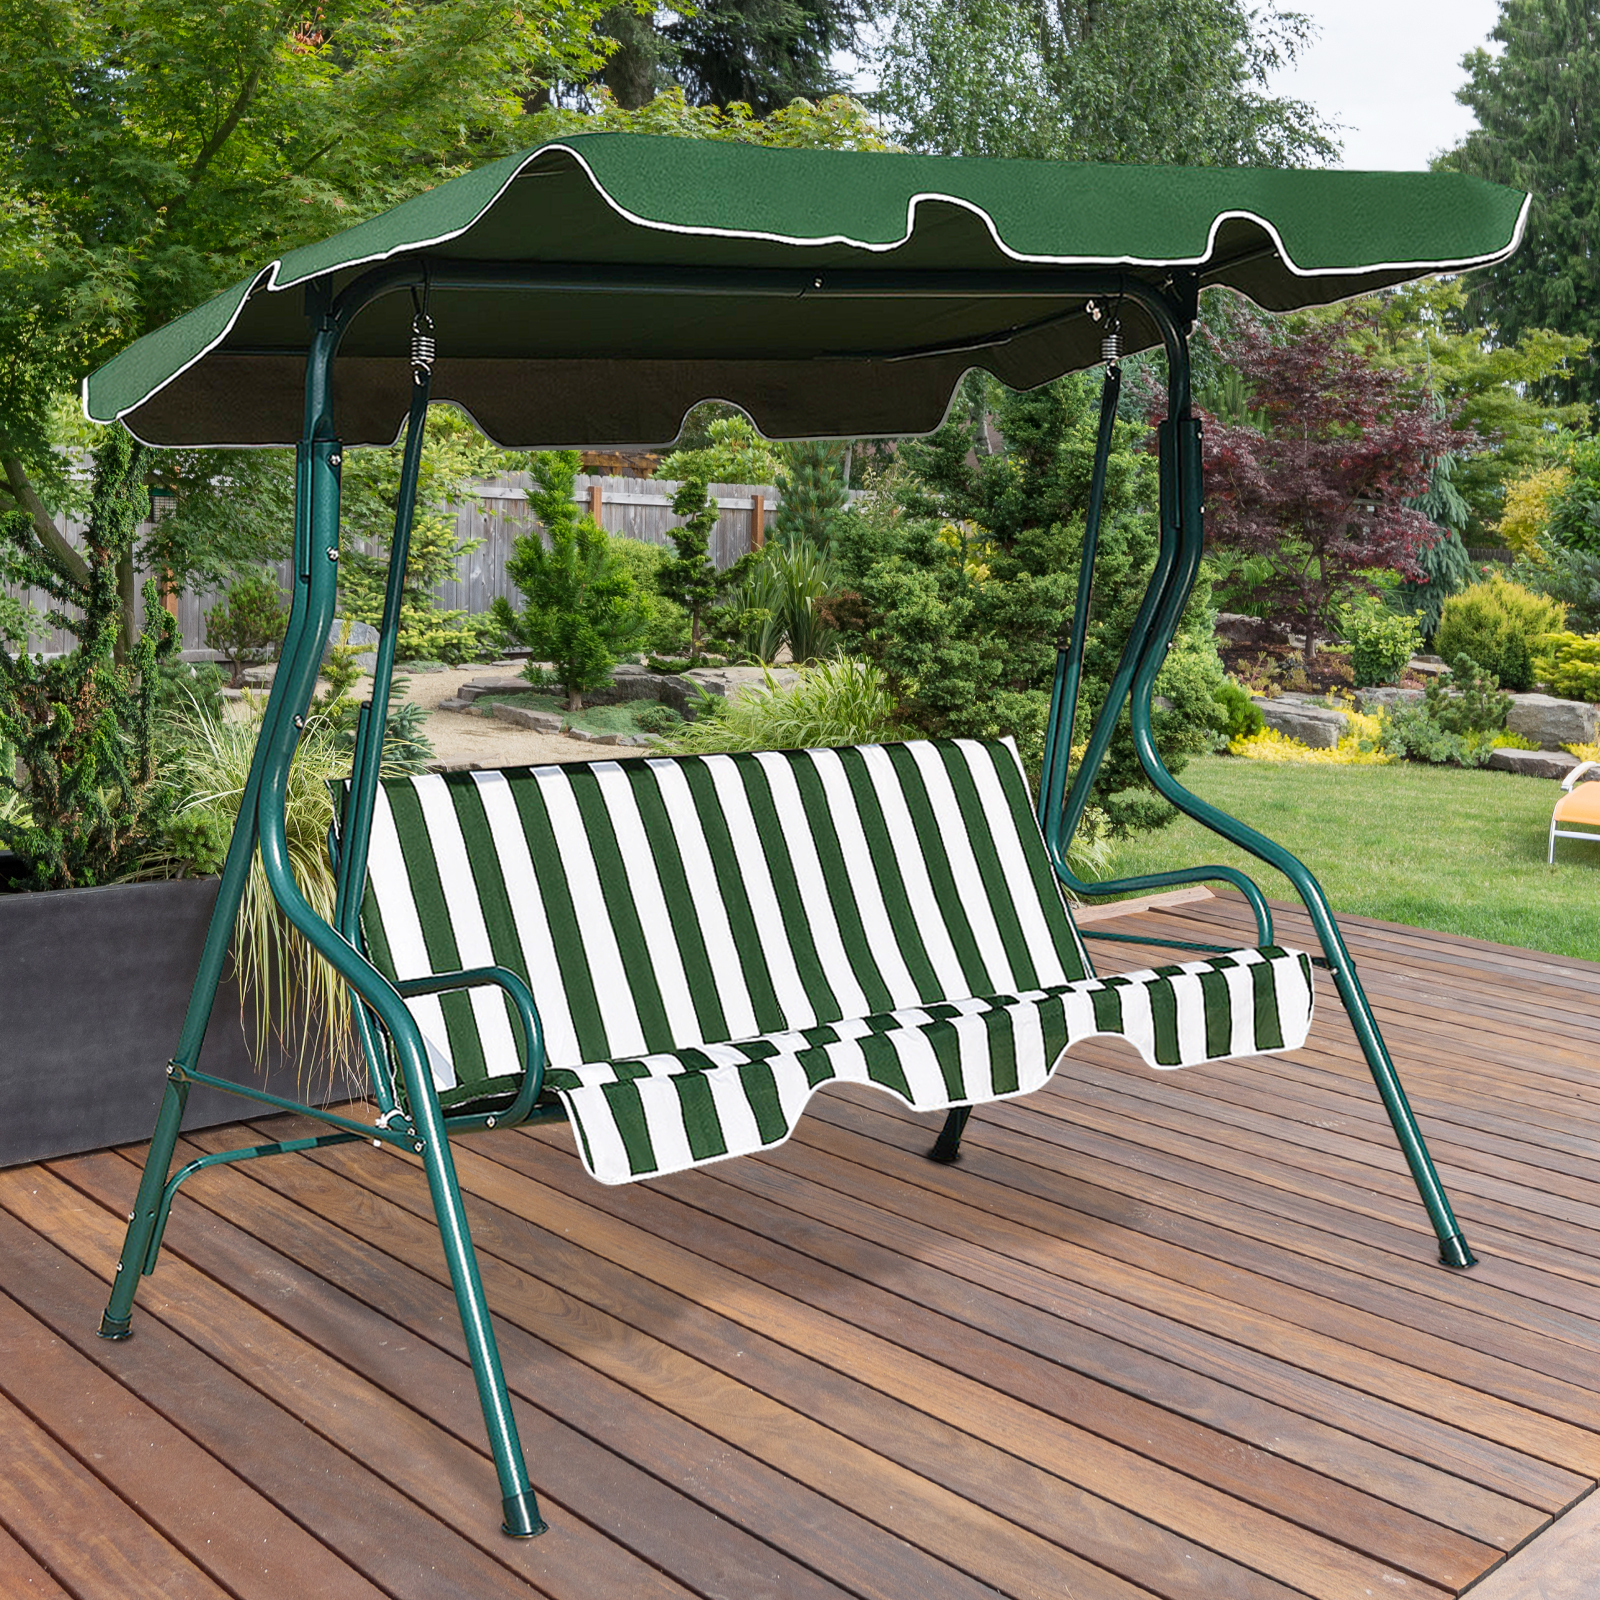 Patiojoy 3-Seats Outdoor Glider Hammock with Adjustable Waterproof Canopy Aluminum Frame Patio Swing Chair Green - image 3 of 10